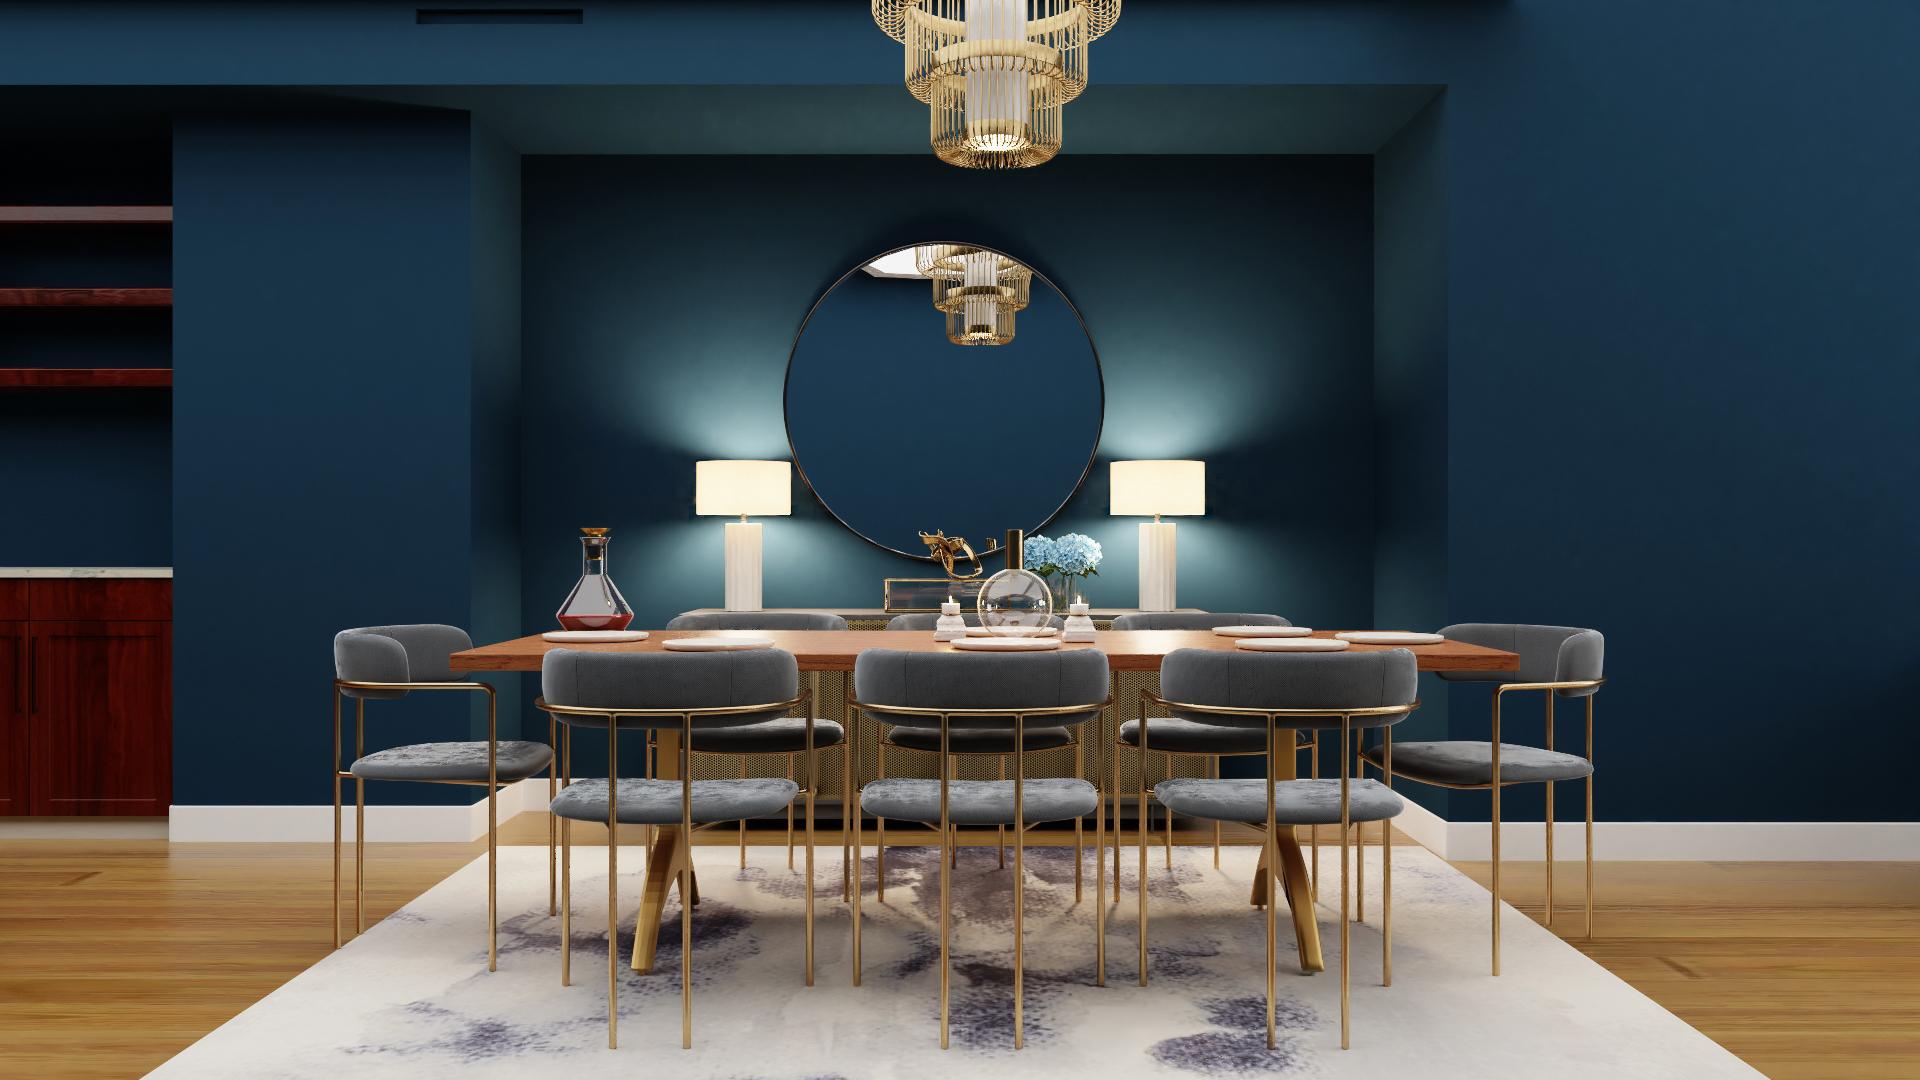 A Dramatic Sophisticated Dining Room Worth It of a Magazine